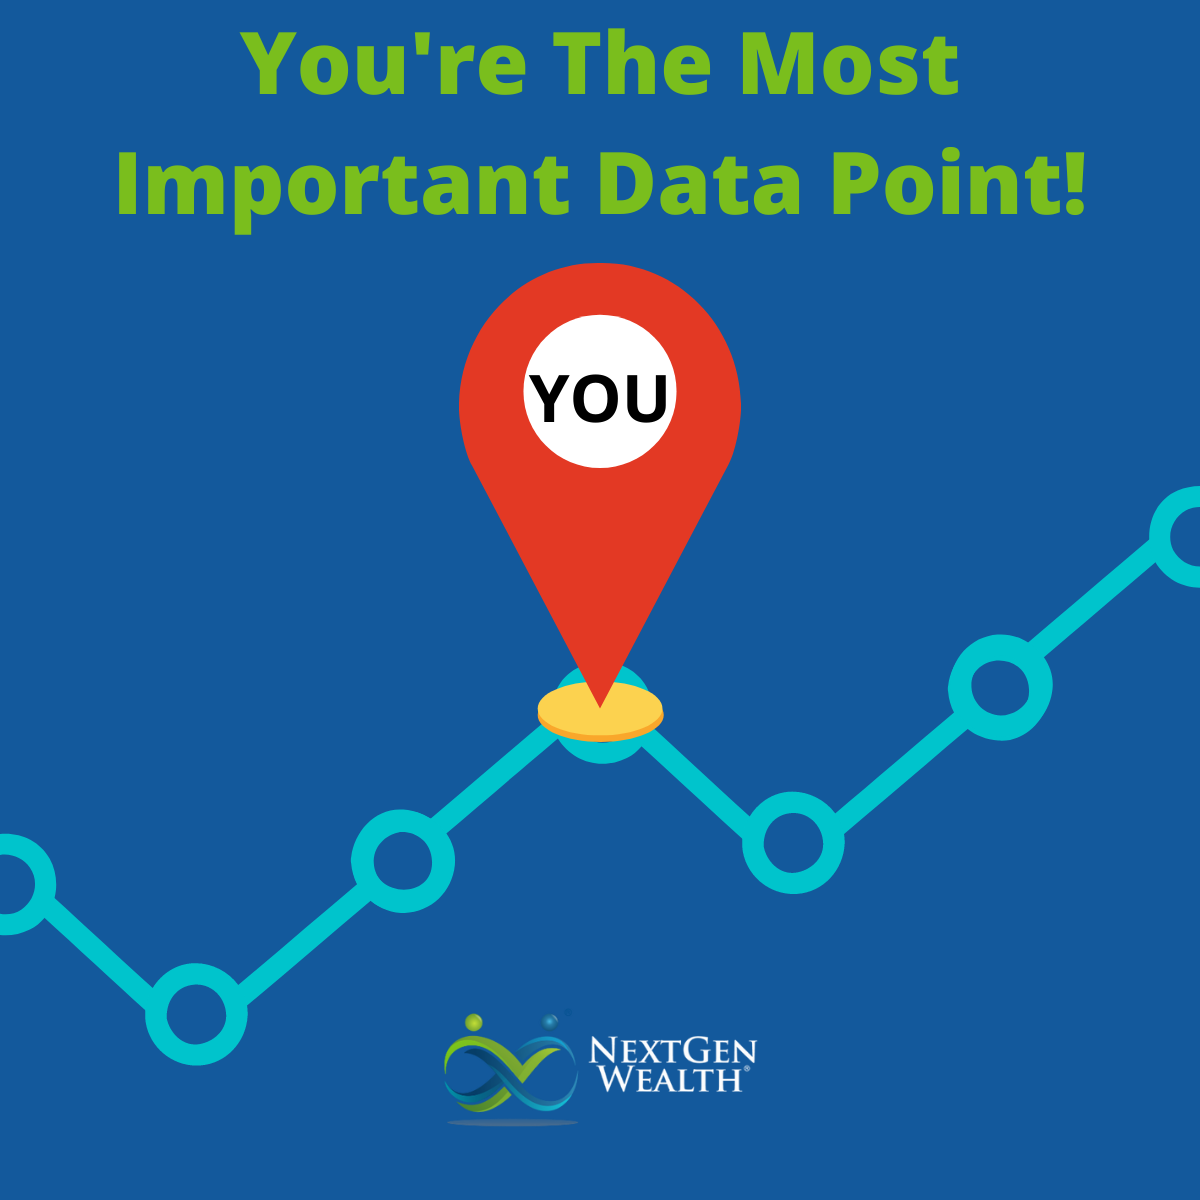 You are The Most Important Data Point